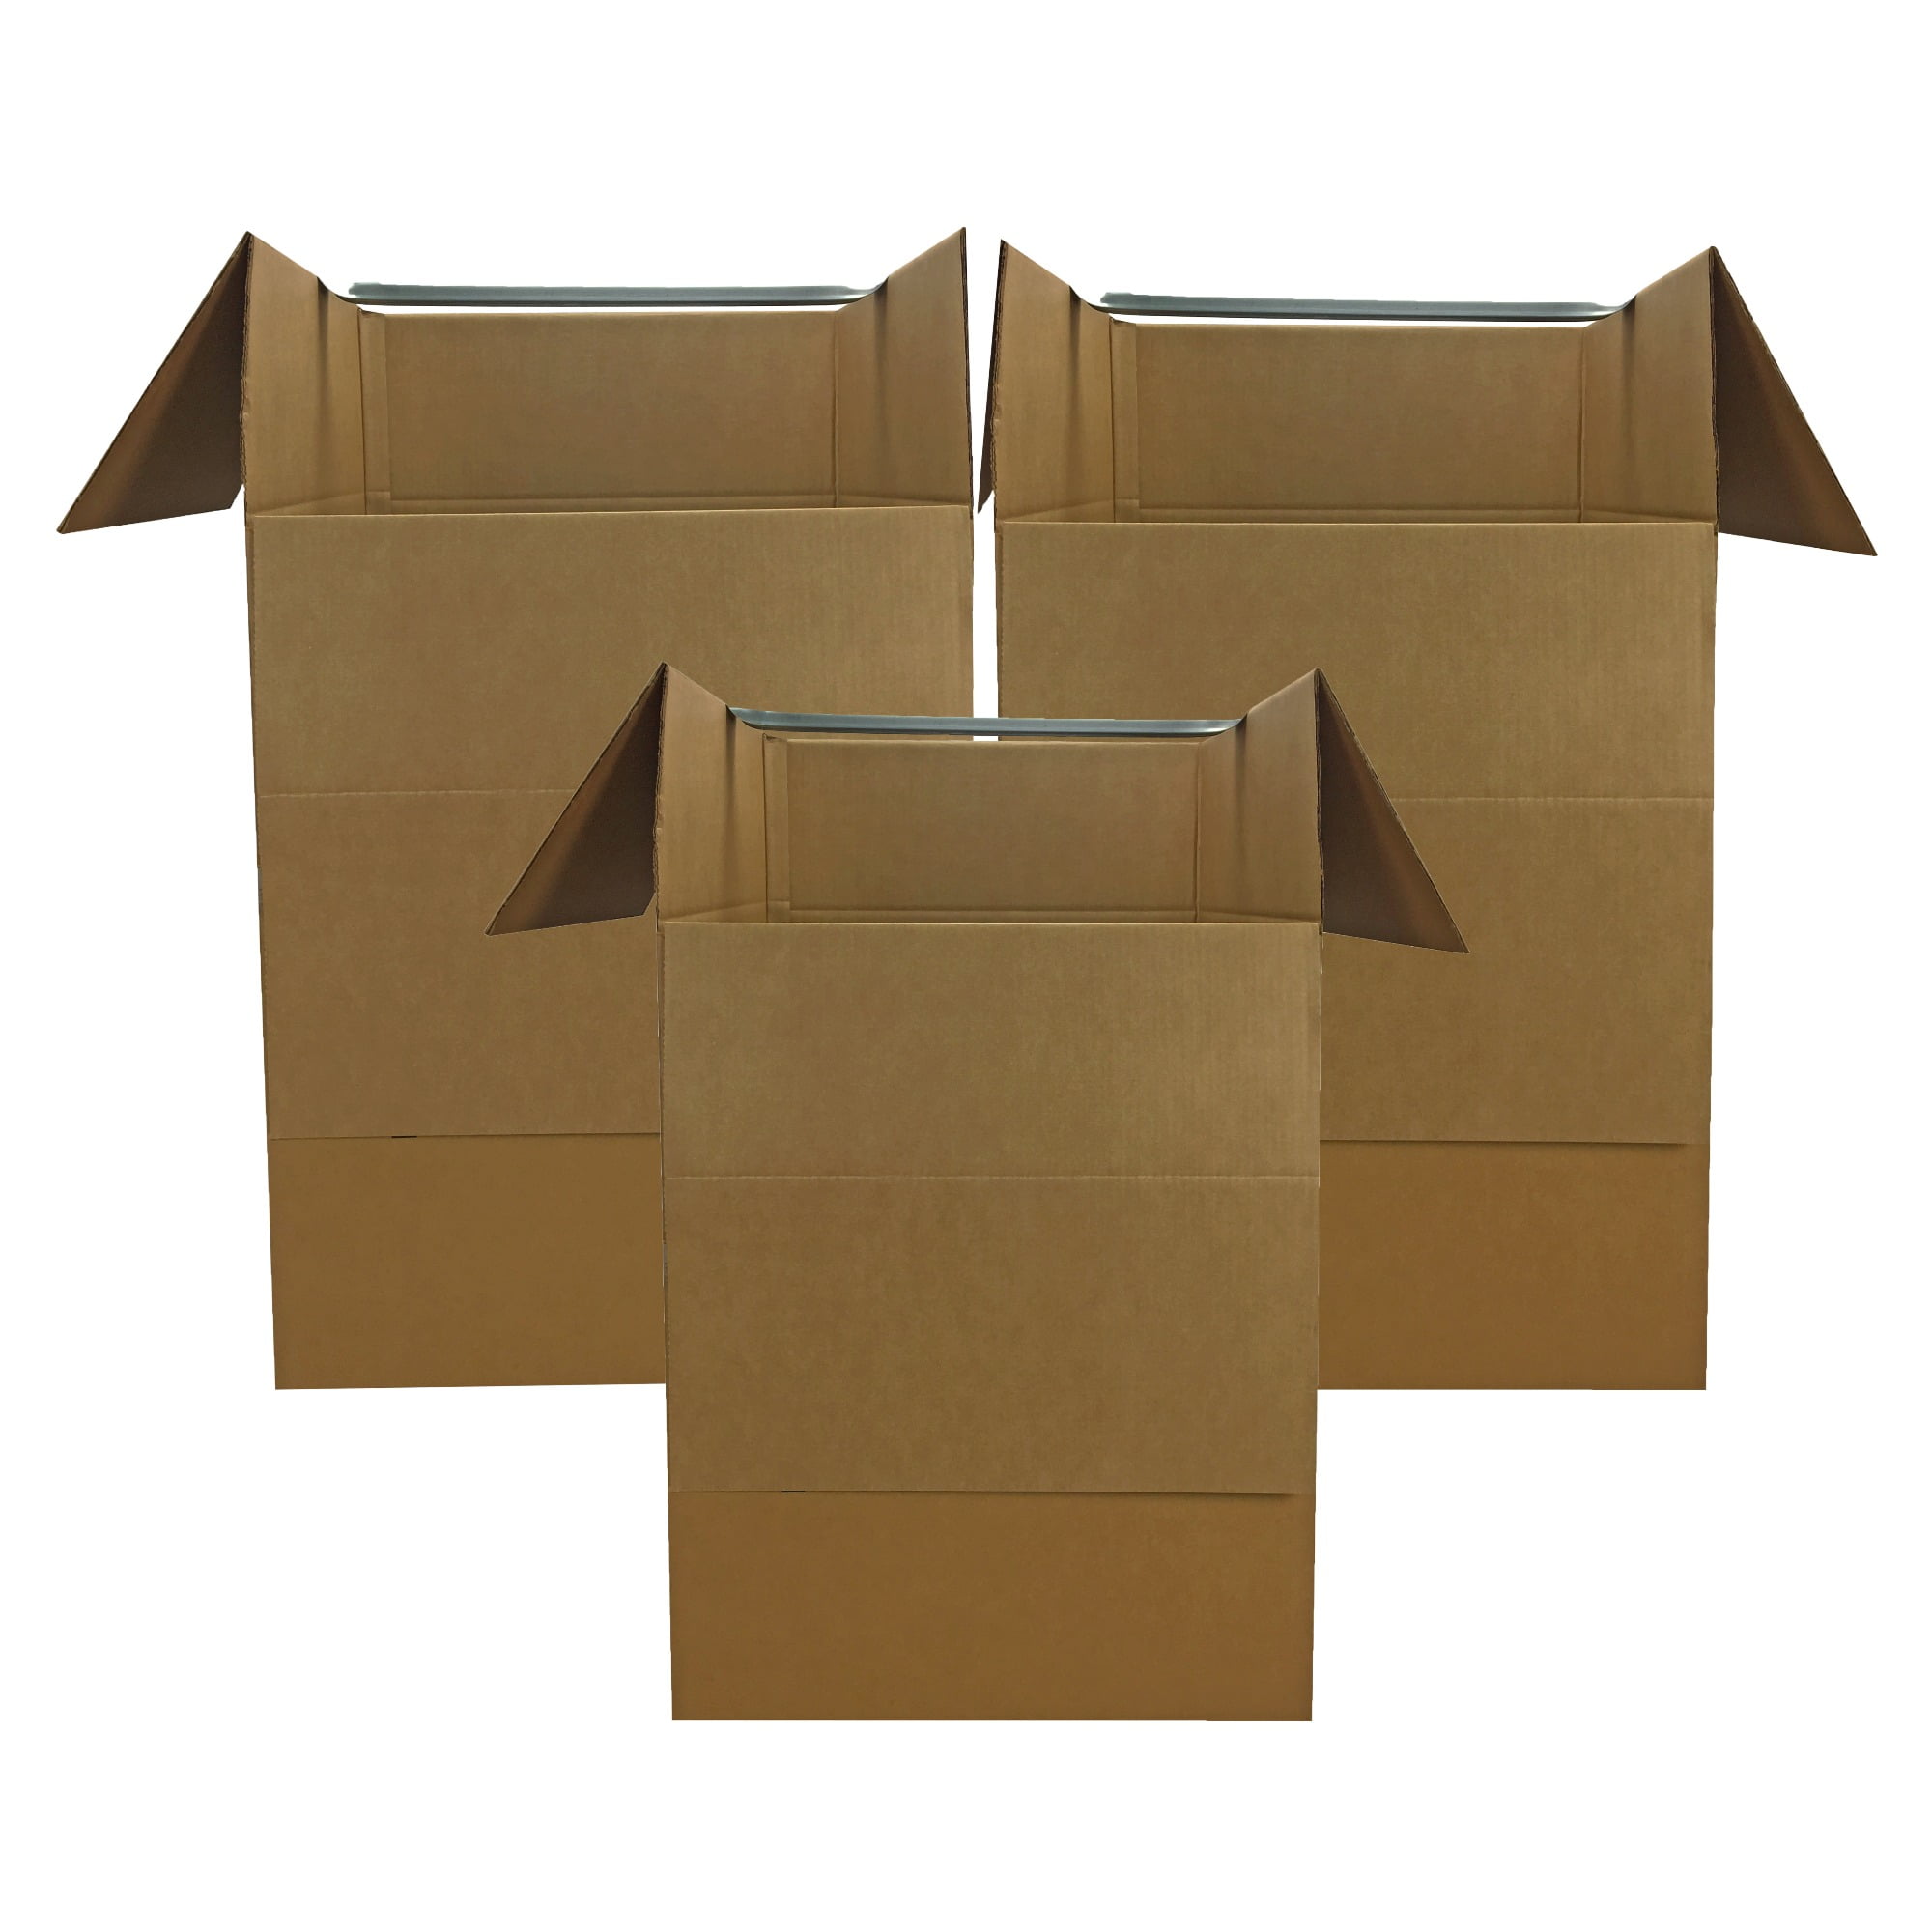 Pen+gear Large Recycled Shipping Boxes, 15L x 12W x 10H, Kraft, 25 Count, Brown